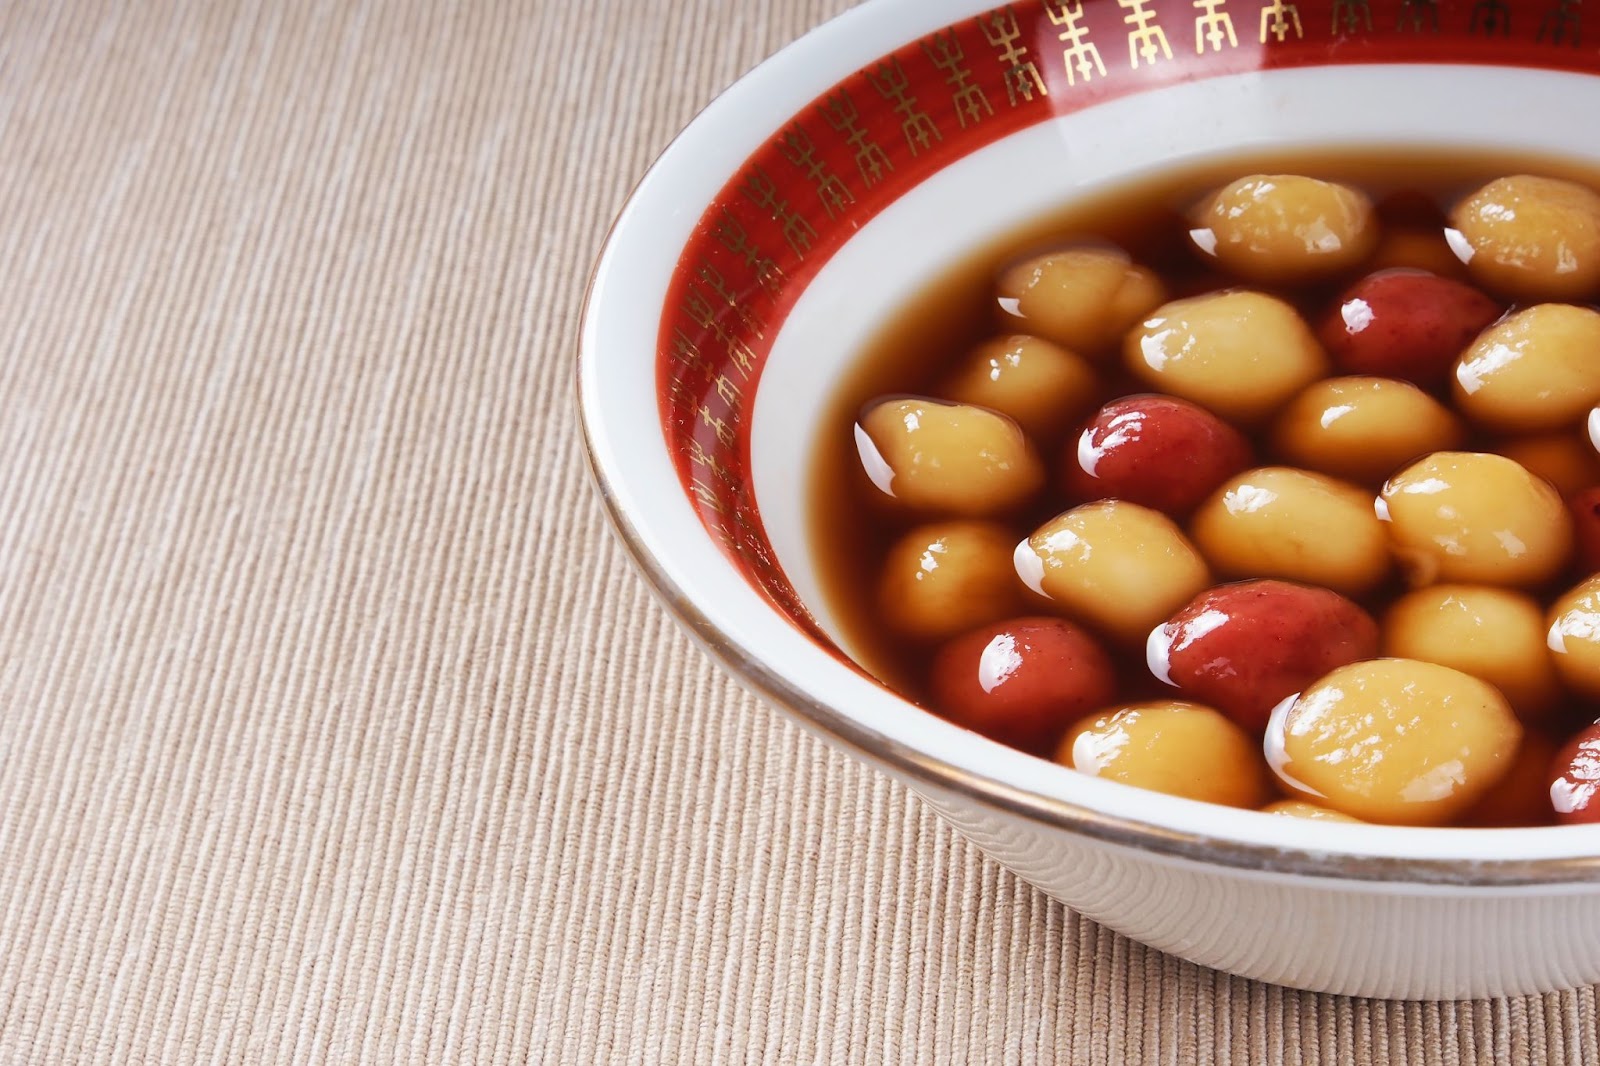 Glutinous rice balls are a traditional food during the Spring Festival